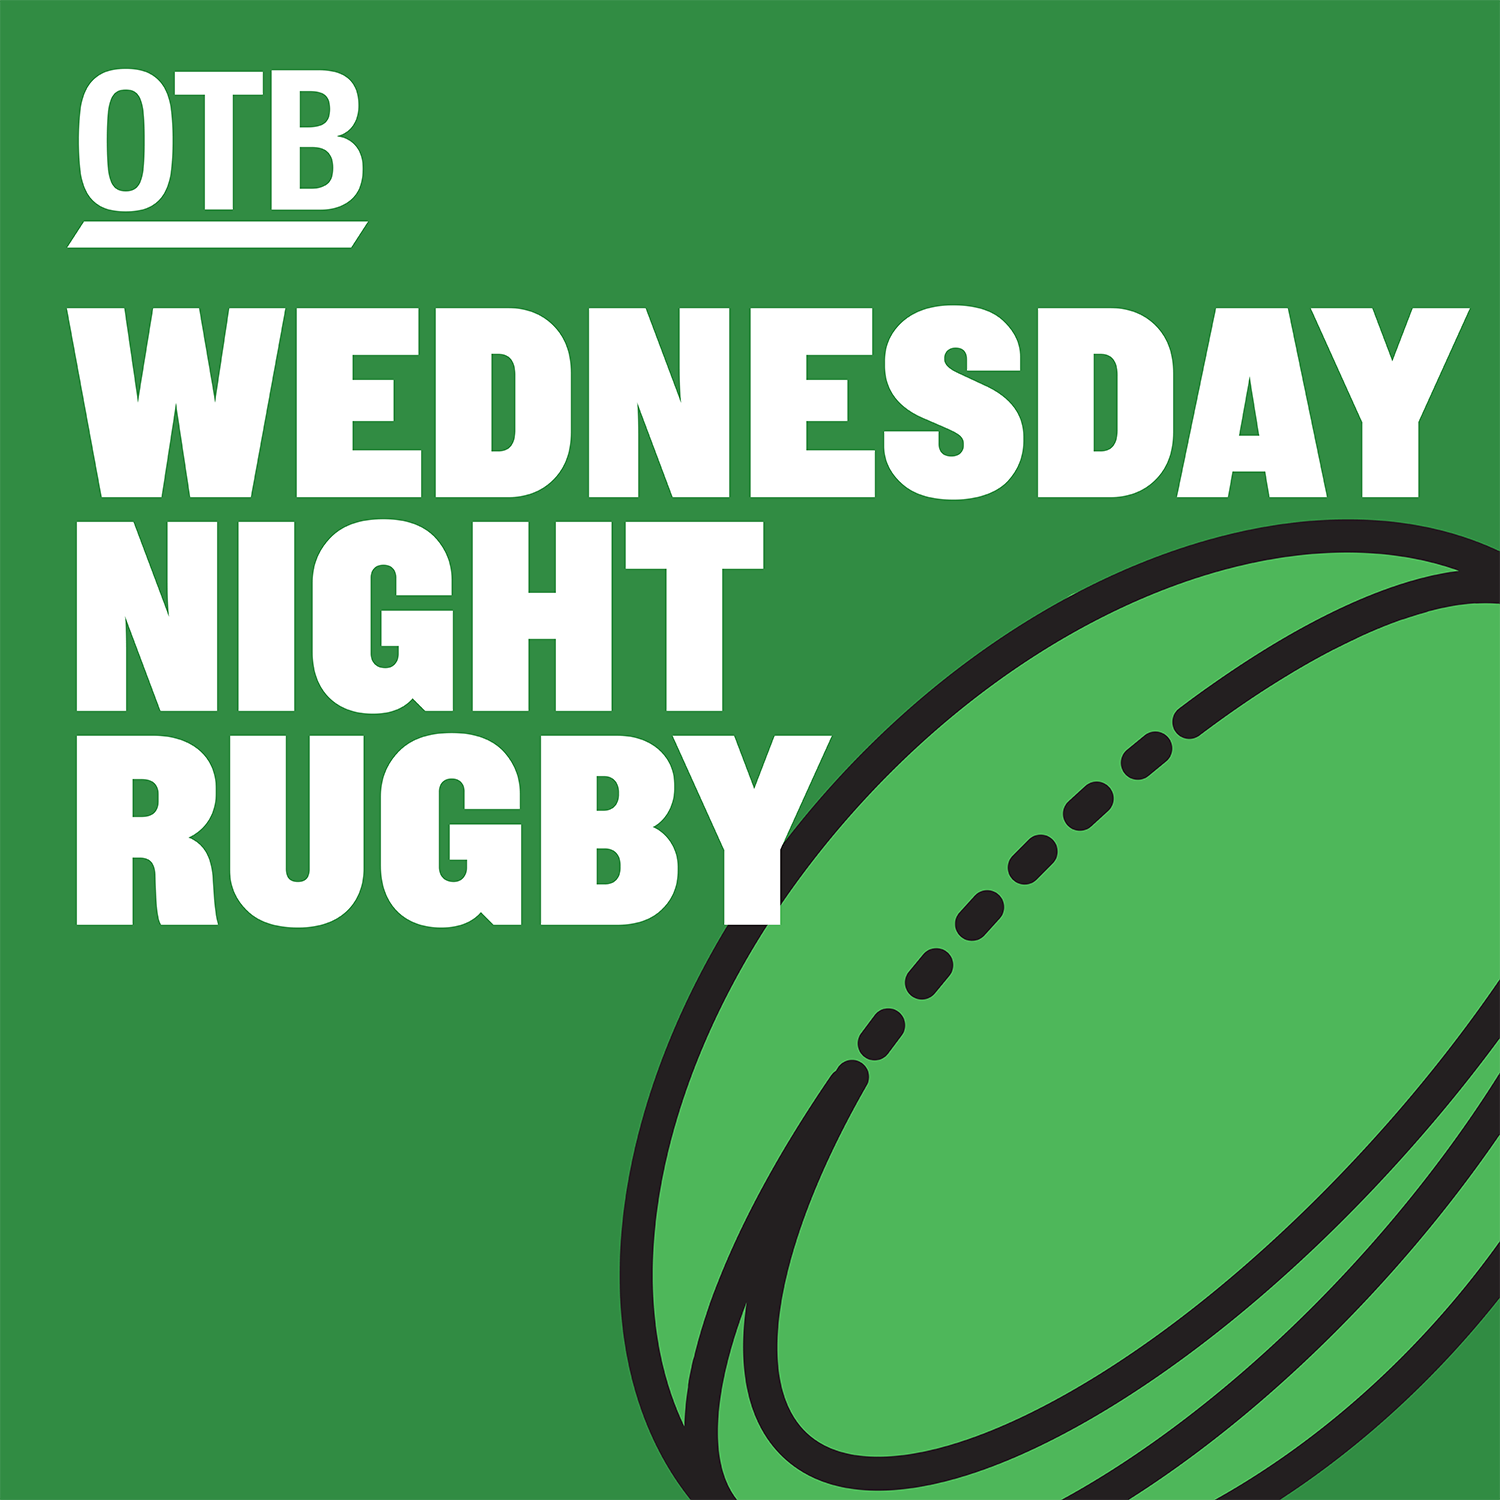 WEDNESDAY NIGHT RUGBY | Don't ban booze but Irish atmosphere needs to change! | Gerry Thornley